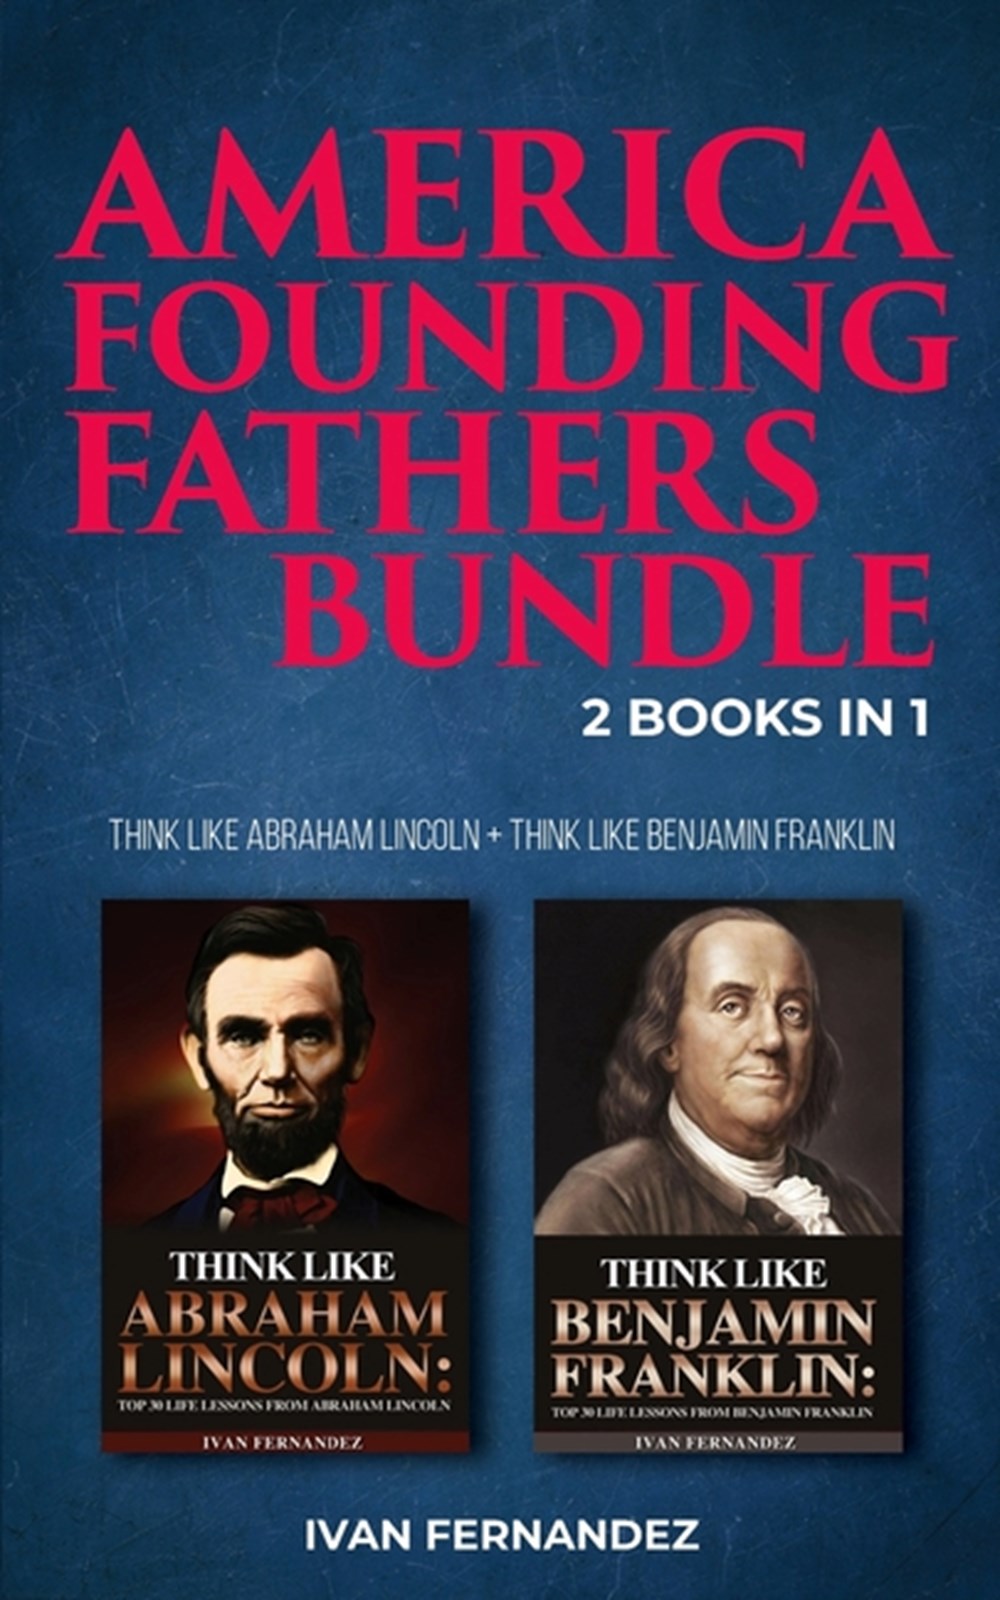 America Founding Fathers Bundle 2 Books in 1: Think Like Abraham Lincoln + Think Like Benjamin Frank